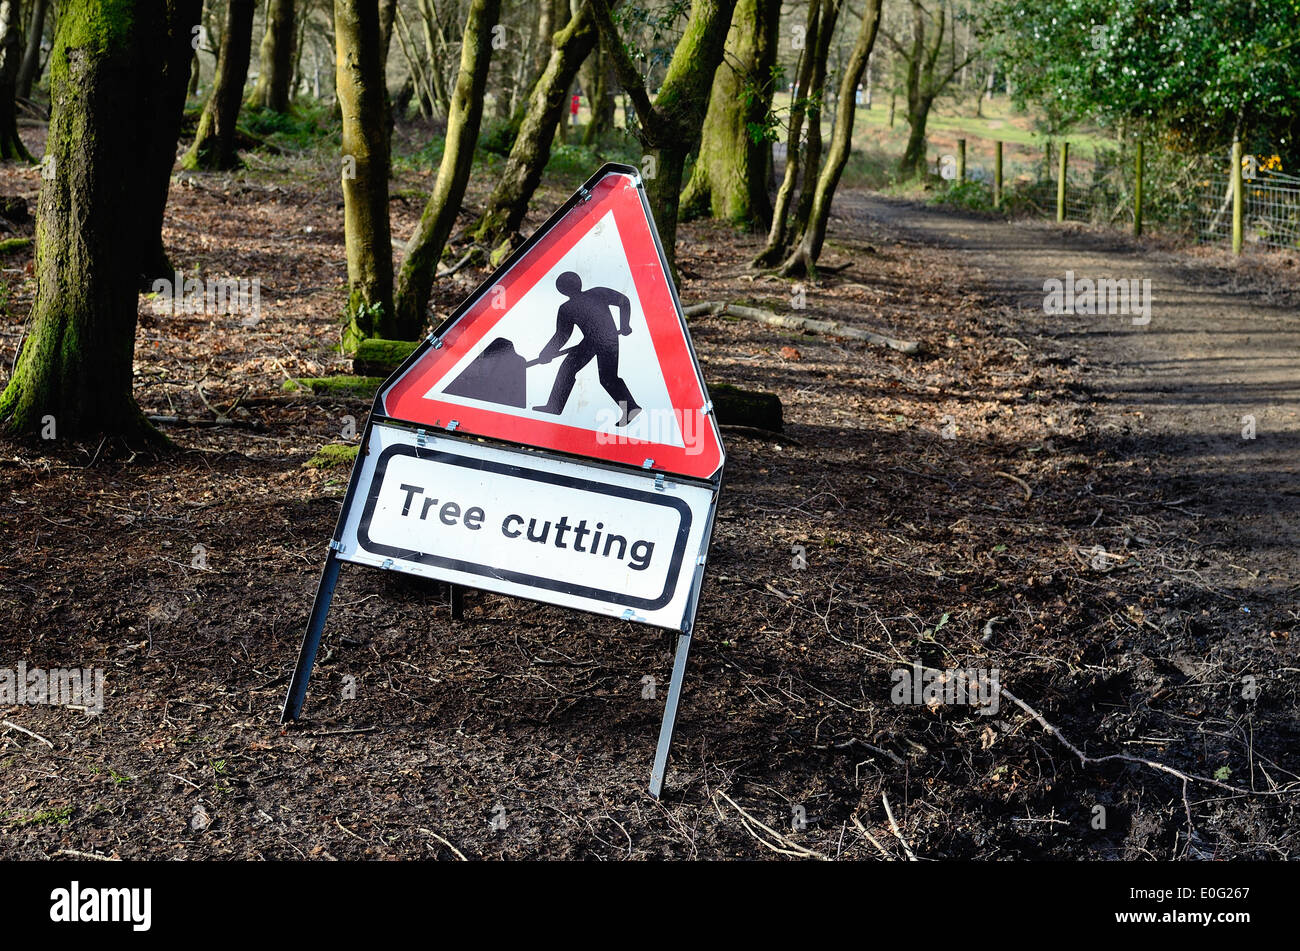 Tree cutting warning sign in woods Stock Photo